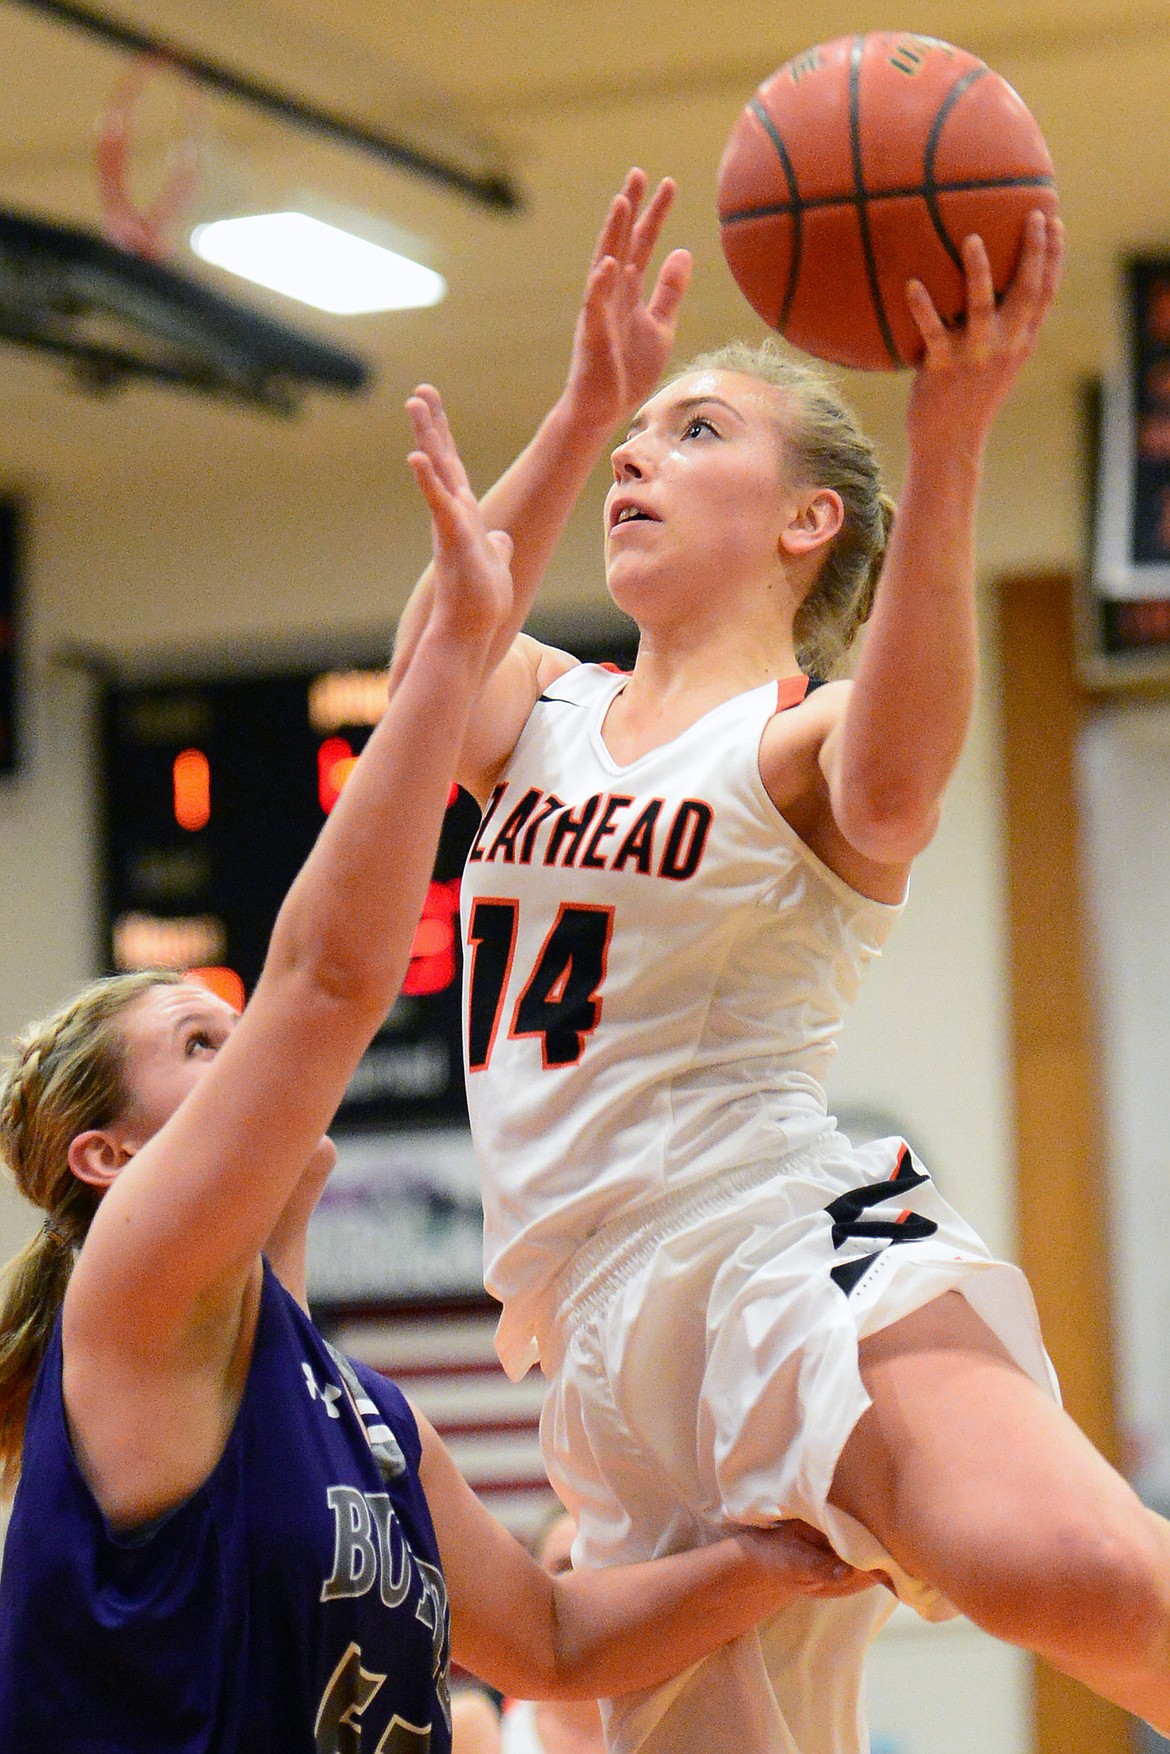 Flathead&#146;s Mary Heaton looks to shoot with Butte&#146;s Brittany Tierney defending. (Casey Kreider/Daily Inter Lake)